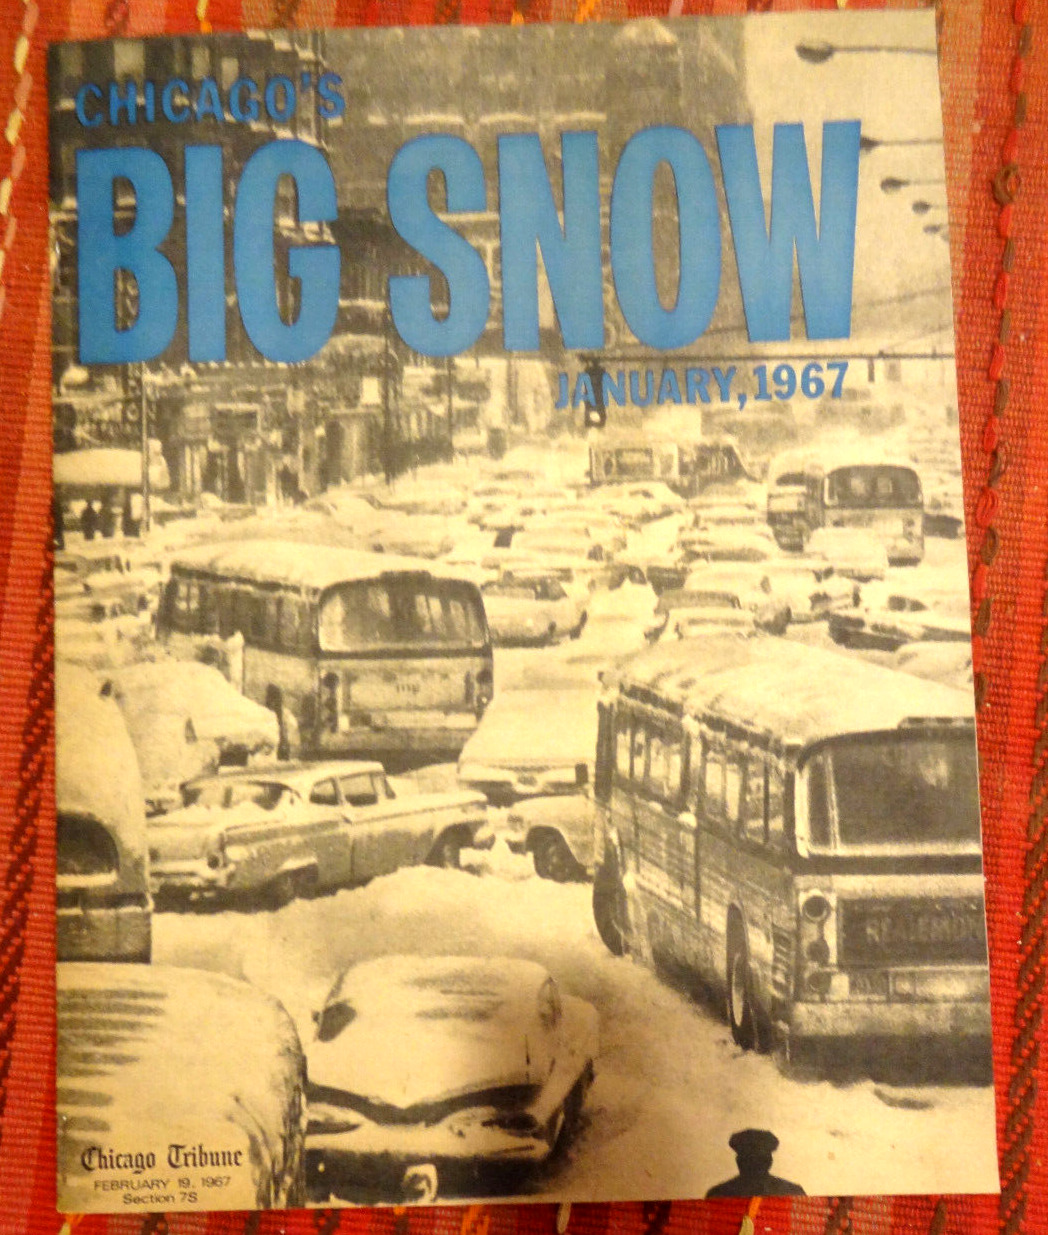 Chicago's Big Snow January 19, 1967 – Special Publication of the Chicago Tribune